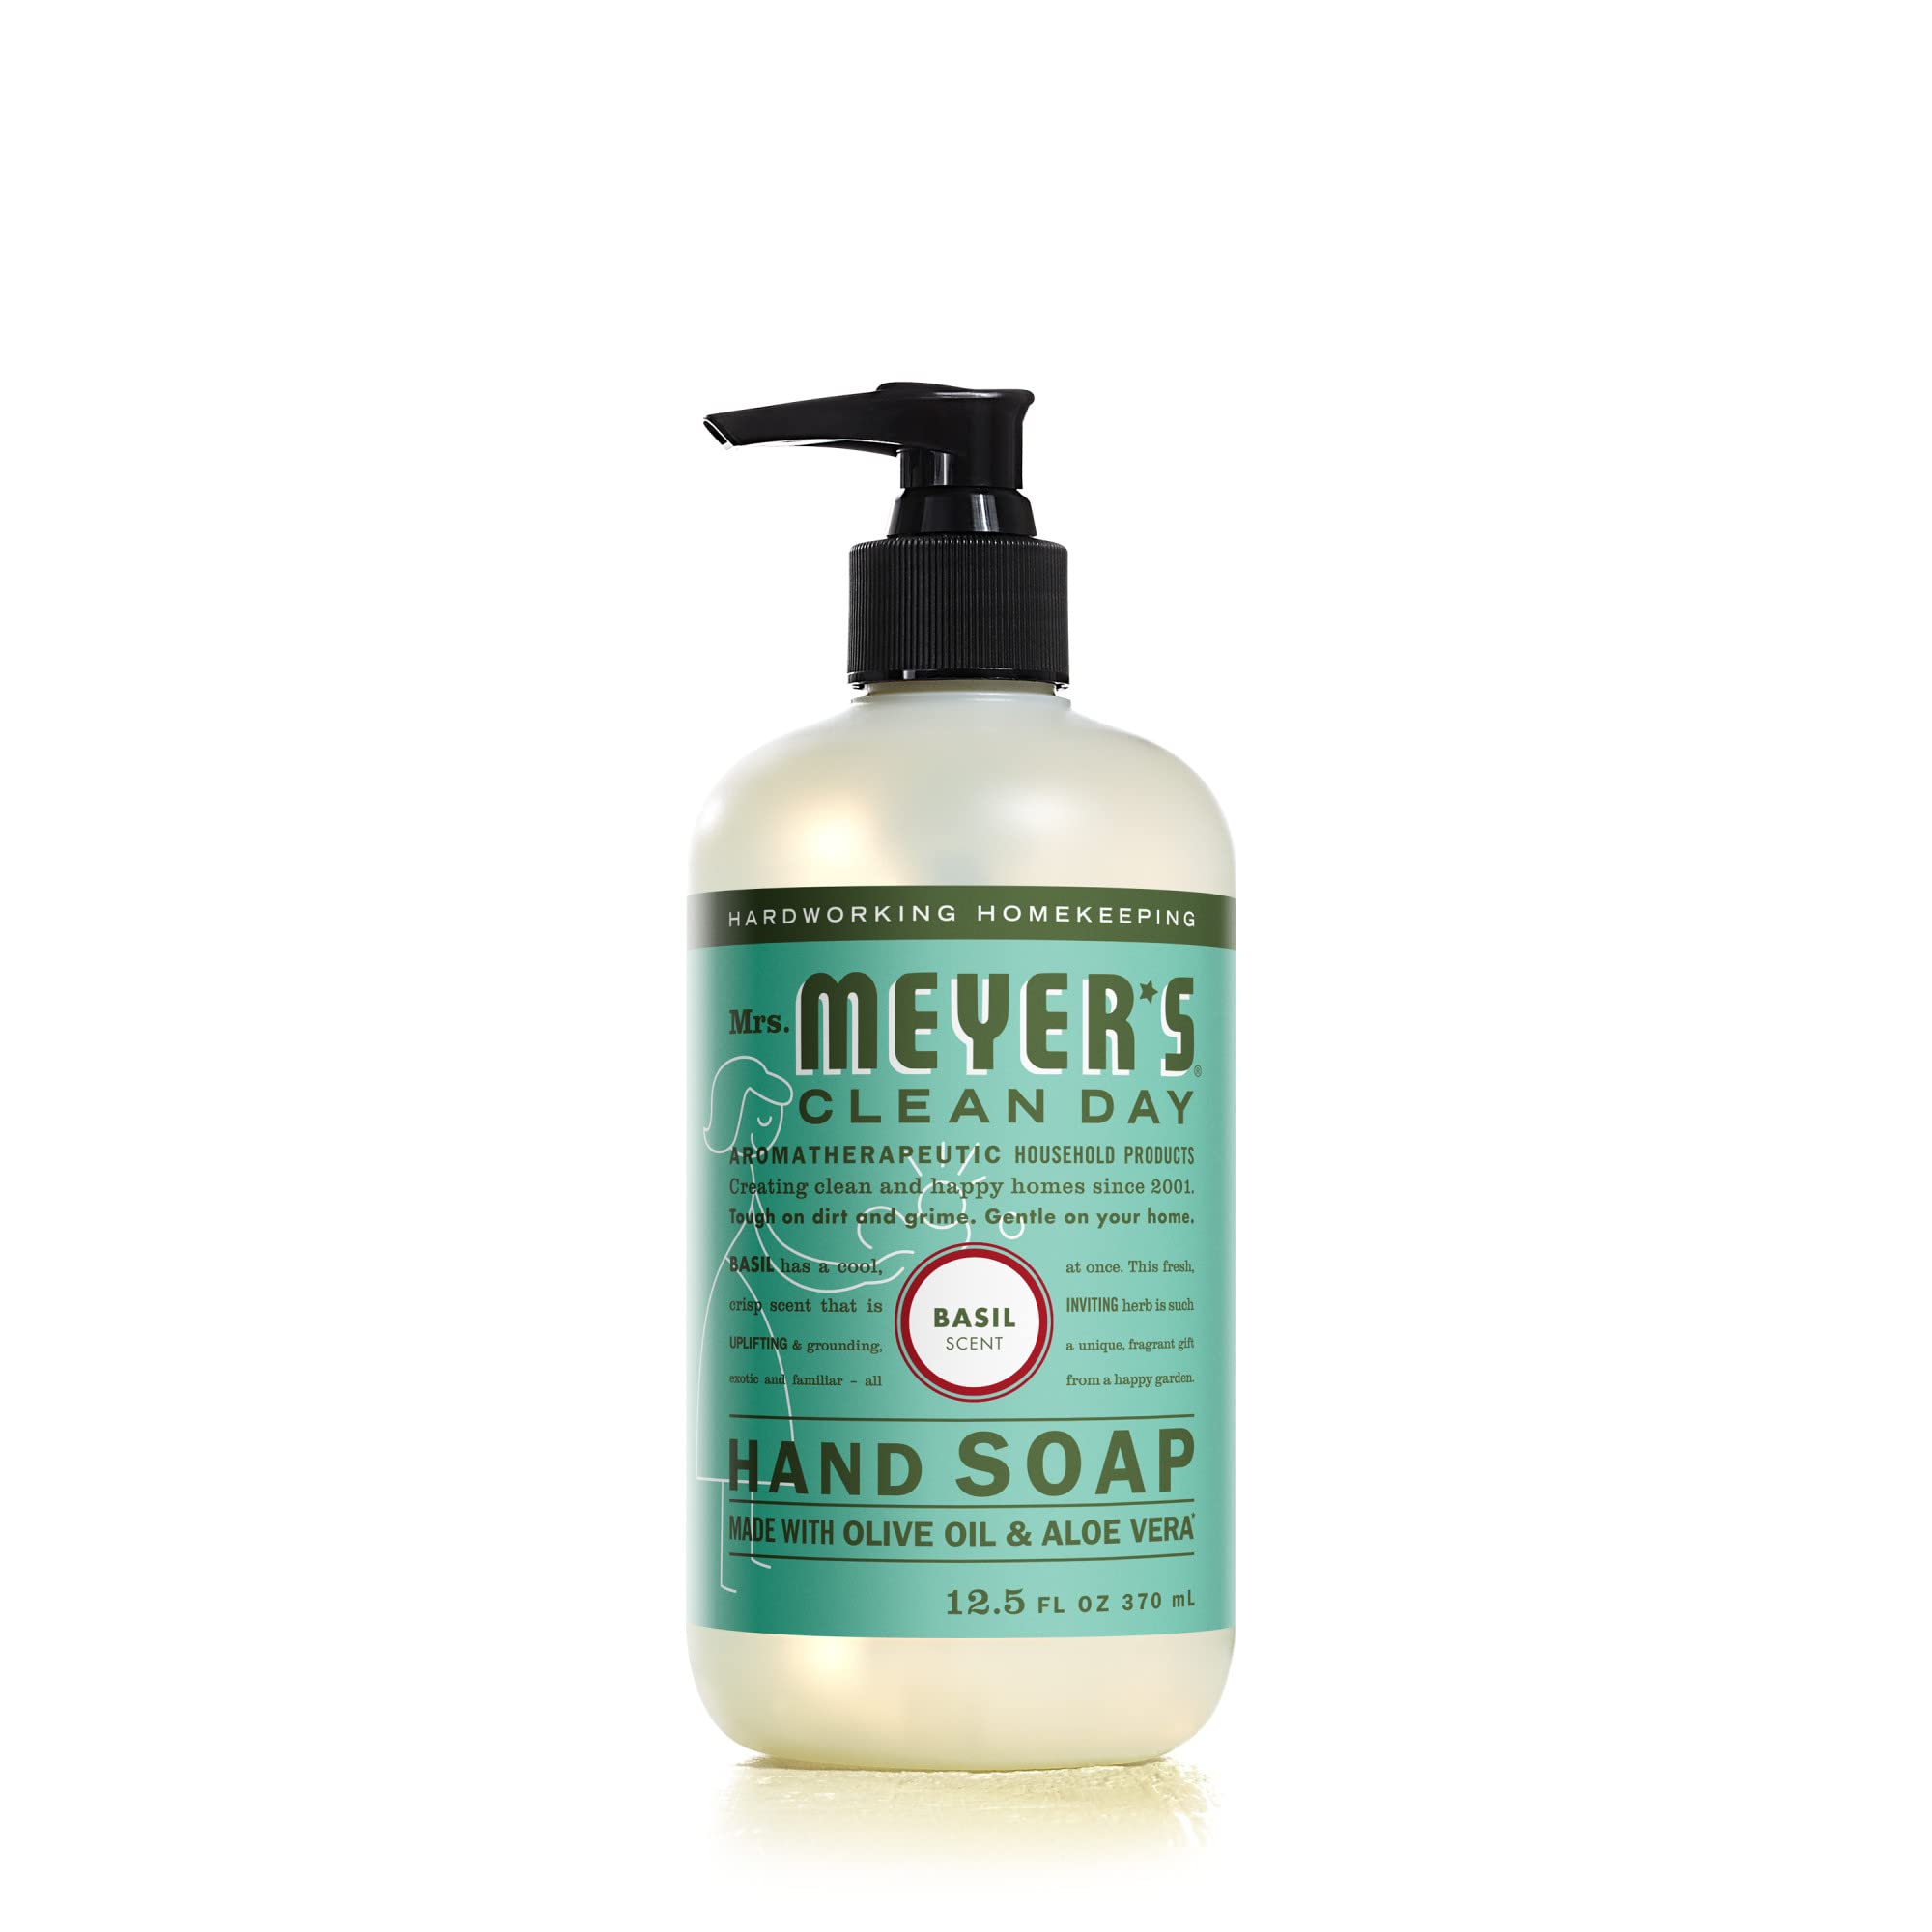 12.5-Oz Mrs. Meyers Clean Day Liquid Hand Soap (Basil) $2.67 w/ S&S + Free Shipping w/ Prime or on orders over $35